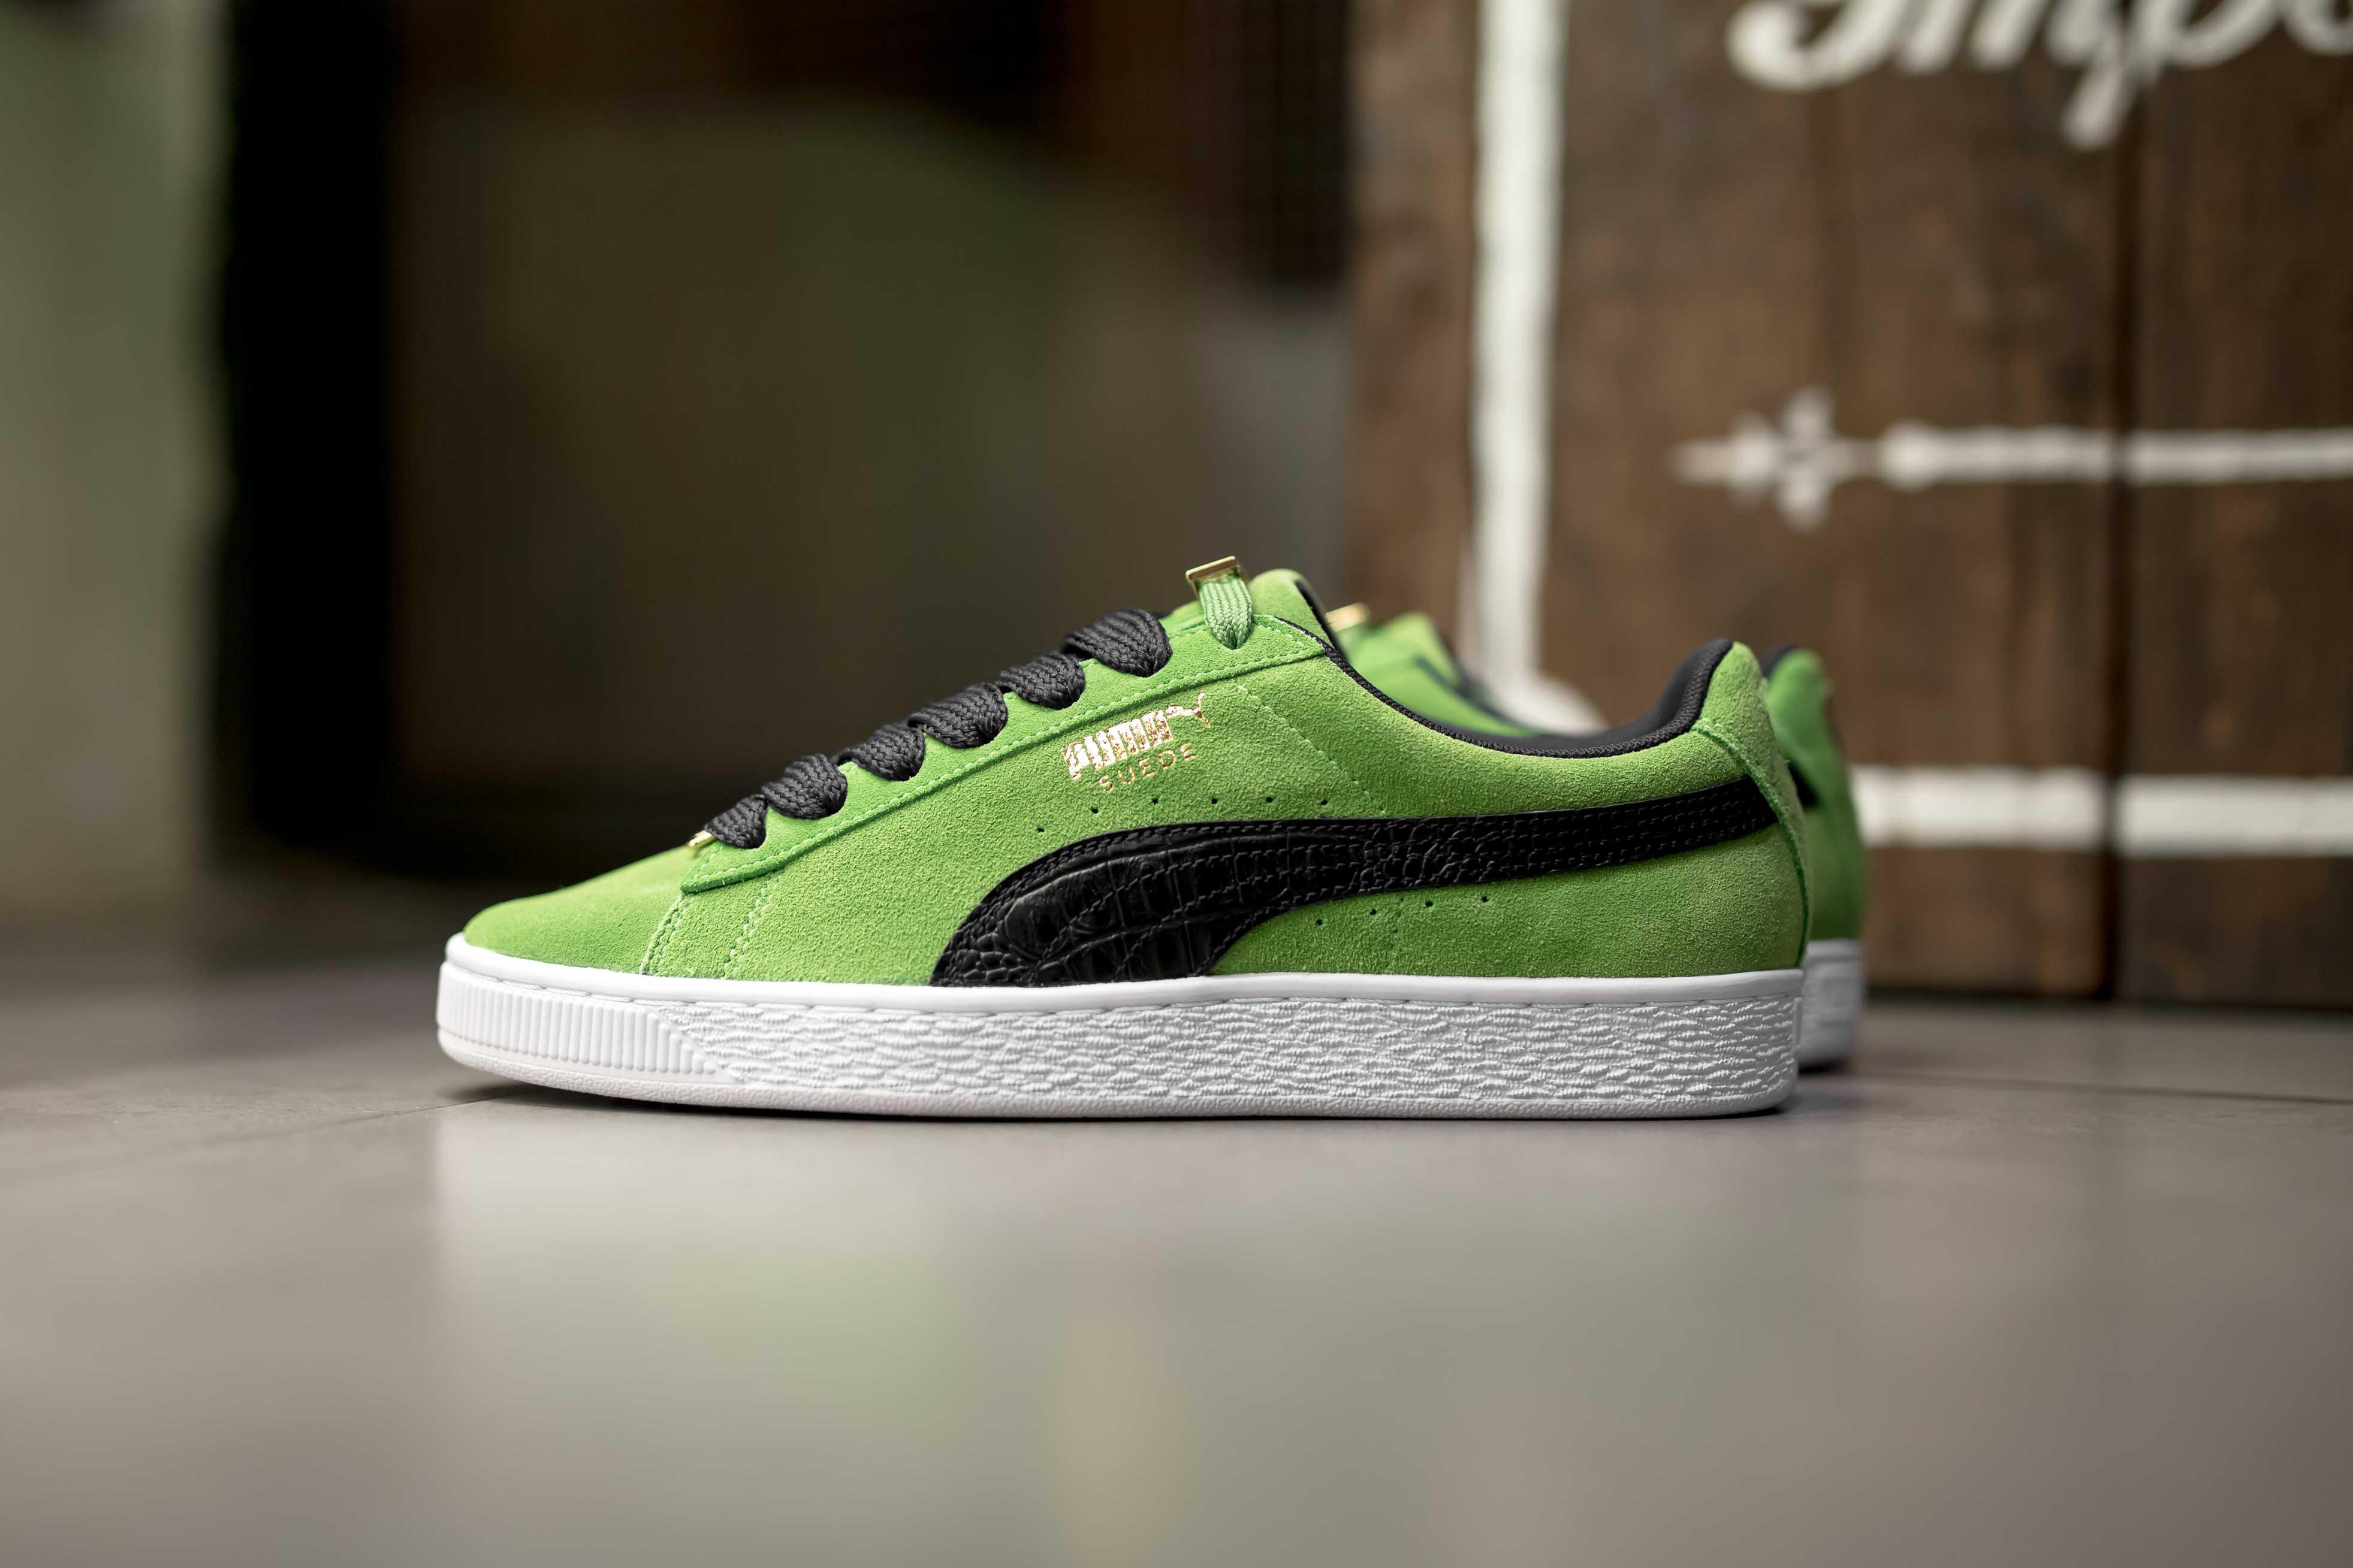 CROSSOVER on Twitter: "Celebrate 50 years of iconic street style with the  B-Boy Fabulous edition of the shoe that made the PUMA name, The Suede. In  Forest Green available now at #CROSSOVER